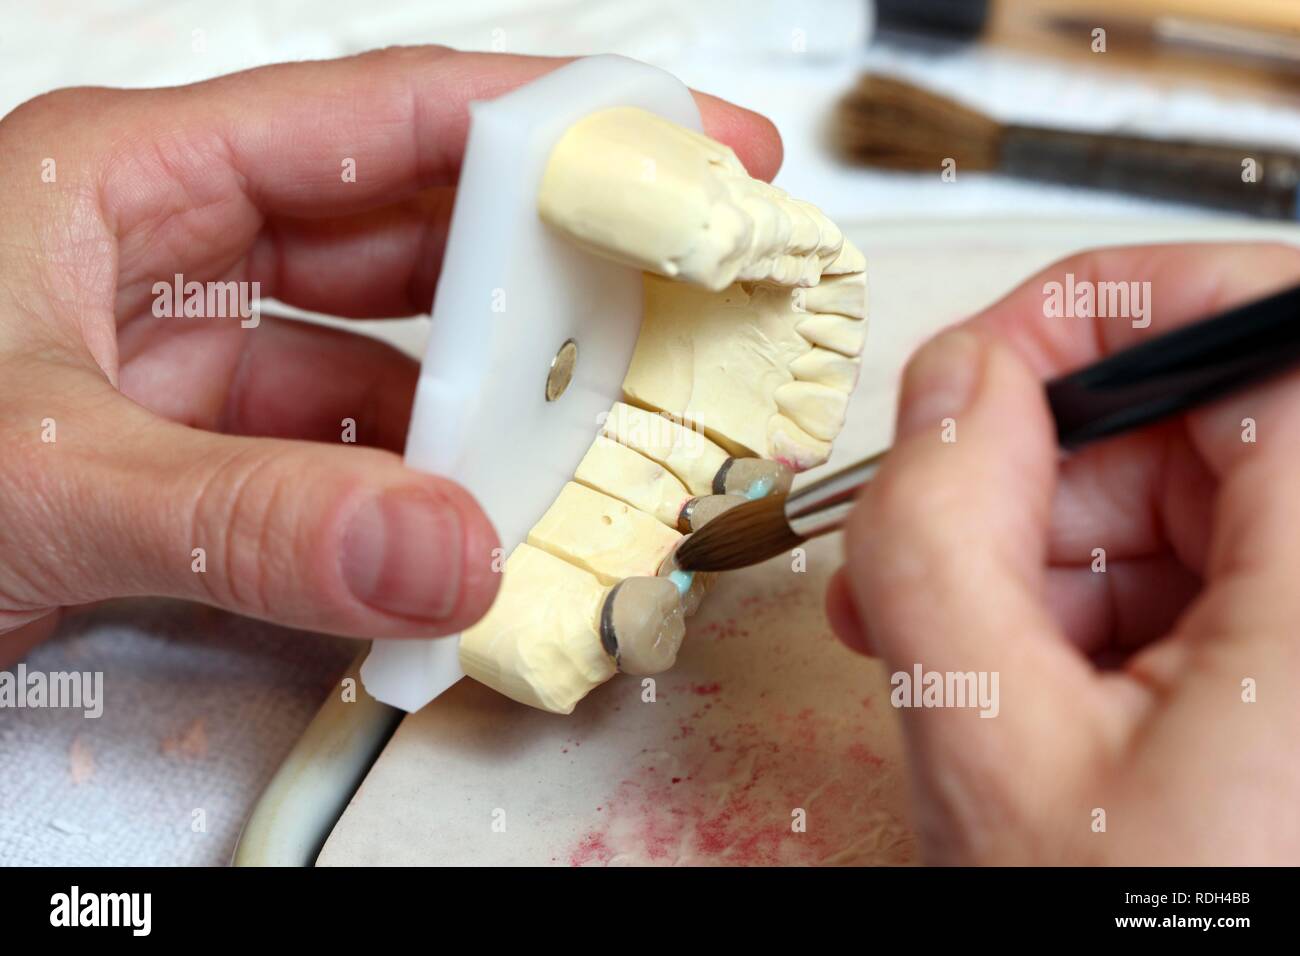 Dental laboratory, manufacture of a dental prostheses by a master craftsman, applying ceramic materials on a dental bridge Stock Photo